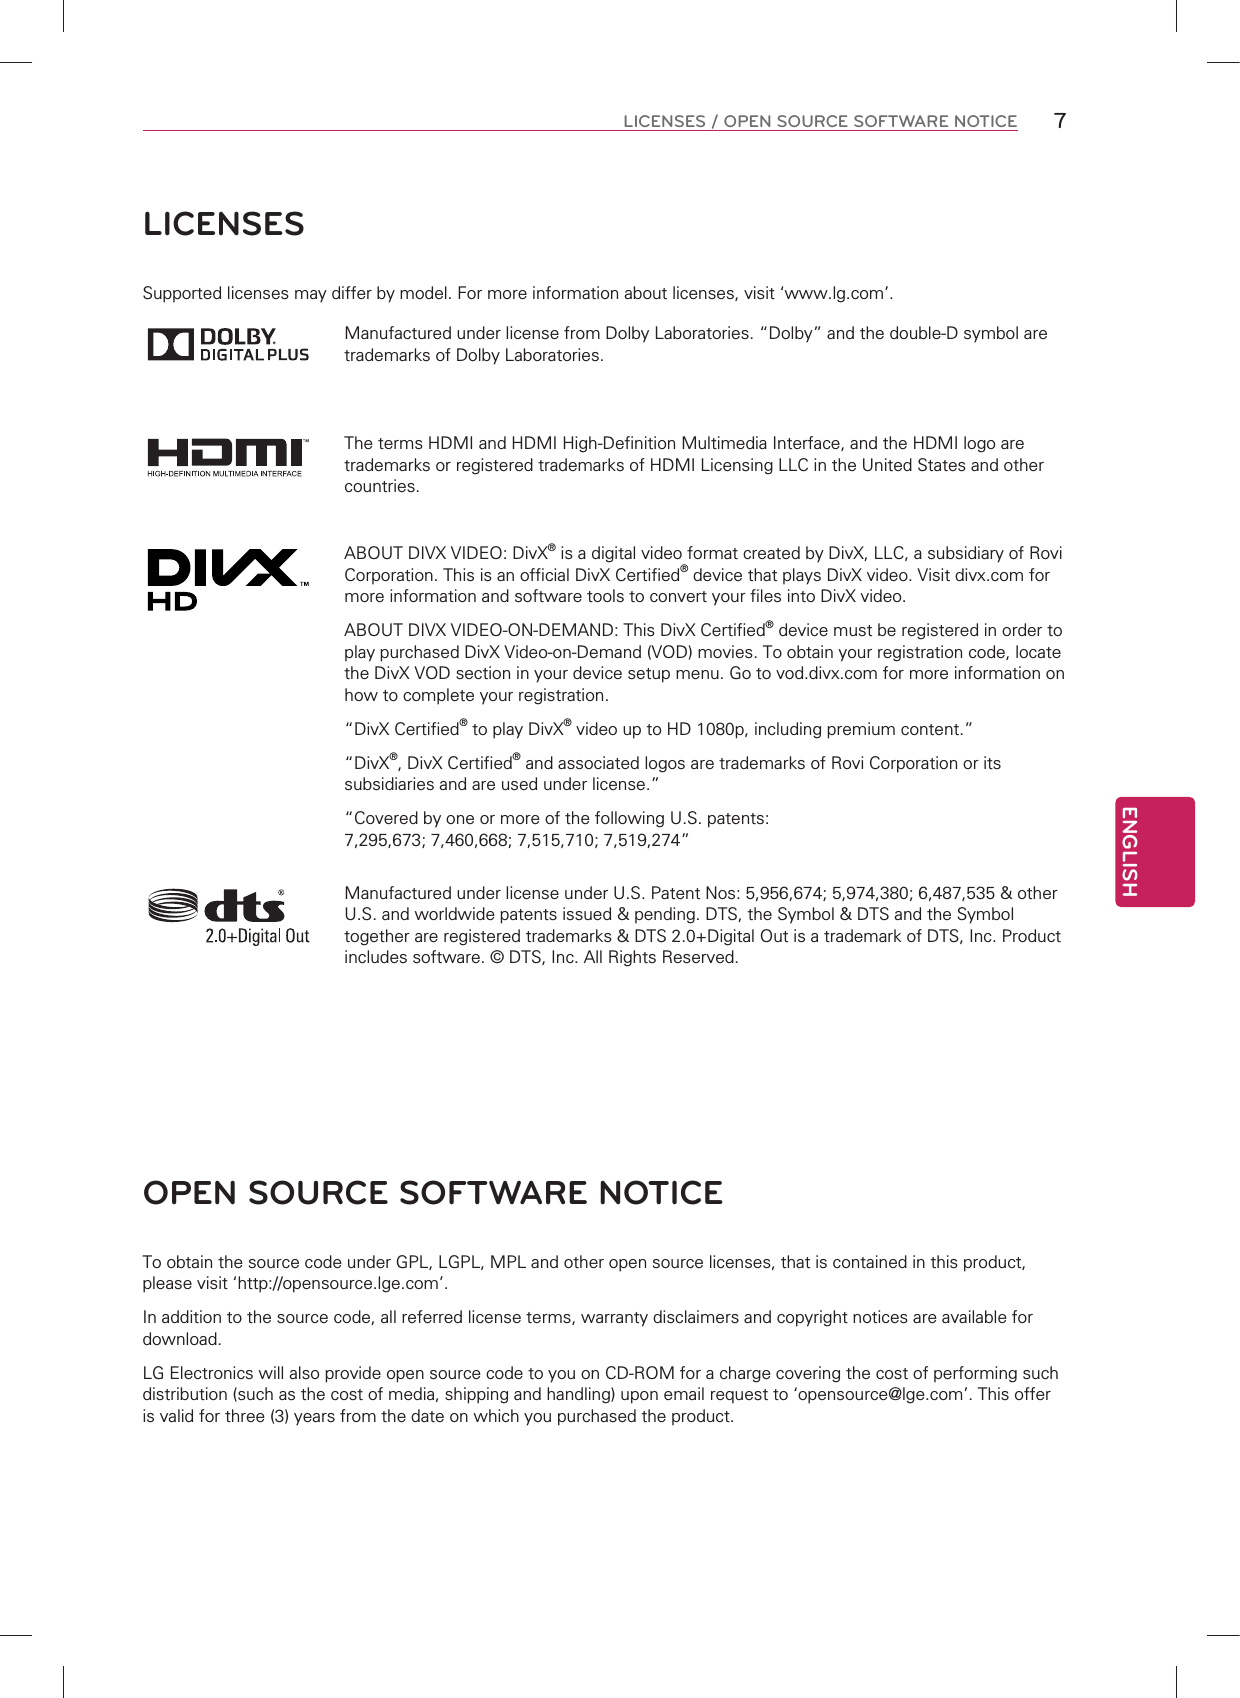 ENGLISH7LICENSES / OPEN SOURCE SOFTWARE NOTICELICENSESSupported licenses may differ by model. For more information about licenses, visit ‘www.lg.com’.Manufactured under license from Dolby Laboratories. “Dolby” and the double-D symbol are trademarks of Dolby Laboratories.The terms HDMI and HDMI High-Definition Multimedia Interface, and the HDMI logo are trademarks or registered trademarks of HDMI Licensing LLC in the United States and other countries.ABOUT DIVX VIDEO: DivX® is a digital video format created by DivX, LLC, a subsidiary of Rovi Corporation. This is an official DivX Certified® device that plays DivX video. Visit divx.com for more information and software tools to convert your files into DivX video.ABOUT DIVX VIDEO-ON-DEMAND: This DivX Certified® device must be registered in order to play purchased DivX Video-on-Demand (VOD) movies. To obtain your registration code, locate the DivX VOD section in your device setup menu. Go to vod.divx.com for more information on how to complete your registration. “DivX Certified® to play DivX® video up to HD 1080p, including premium content.”“DivX®, DivX Certified® and associated logos are trademarks of Rovi Corporation or its subsidiaries and are used under license.”“Covered by one or more of the following U.S. patents: 7,295,673; 7,460,668; 7,515,710; 7,519,274”Manufactured under license under U.S. Patent Nos: 5,956,674; 5,974,380; 6,487,535 &amp; other U.S. and worldwide patents issued &amp; pending. DTS, the Symbol &amp; DTS and the Symbol together are registered trademarks &amp; DTS 2.0+Digital Out is a trademark of DTS, Inc. Product includes software. © DTS, Inc. All Rights Reserved.OPEN SOURCE SOFTWARE NOTICETo obtain the source code under GPL, LGPL, MPL and other open source licenses, that is contained in this product, please visit ‘http://opensource.lge.com’.In addition to the source code, all referred license terms, warranty disclaimers and copyright notices are available for download.LG Electronics will also provide open source code to you on CD-ROM for a charge covering the cost of performing such distribution (such as the cost of media, shipping and handling) upon email request to ‘opensource@lge.com’. This offer is valid for three (3) years from the date on which you purchased the product.